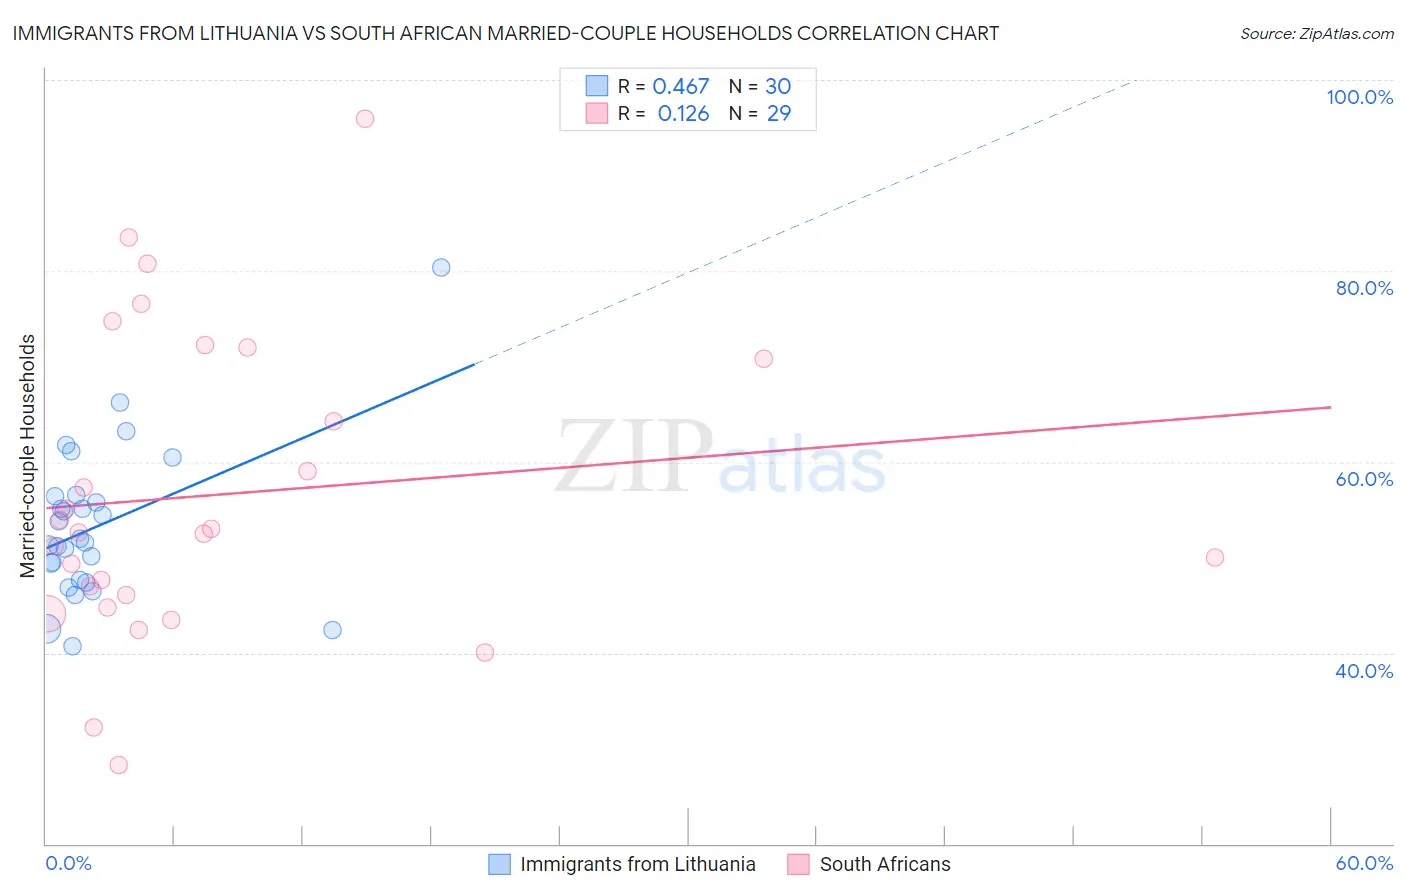 Immigrants from Lithuania vs South African Married-couple Households